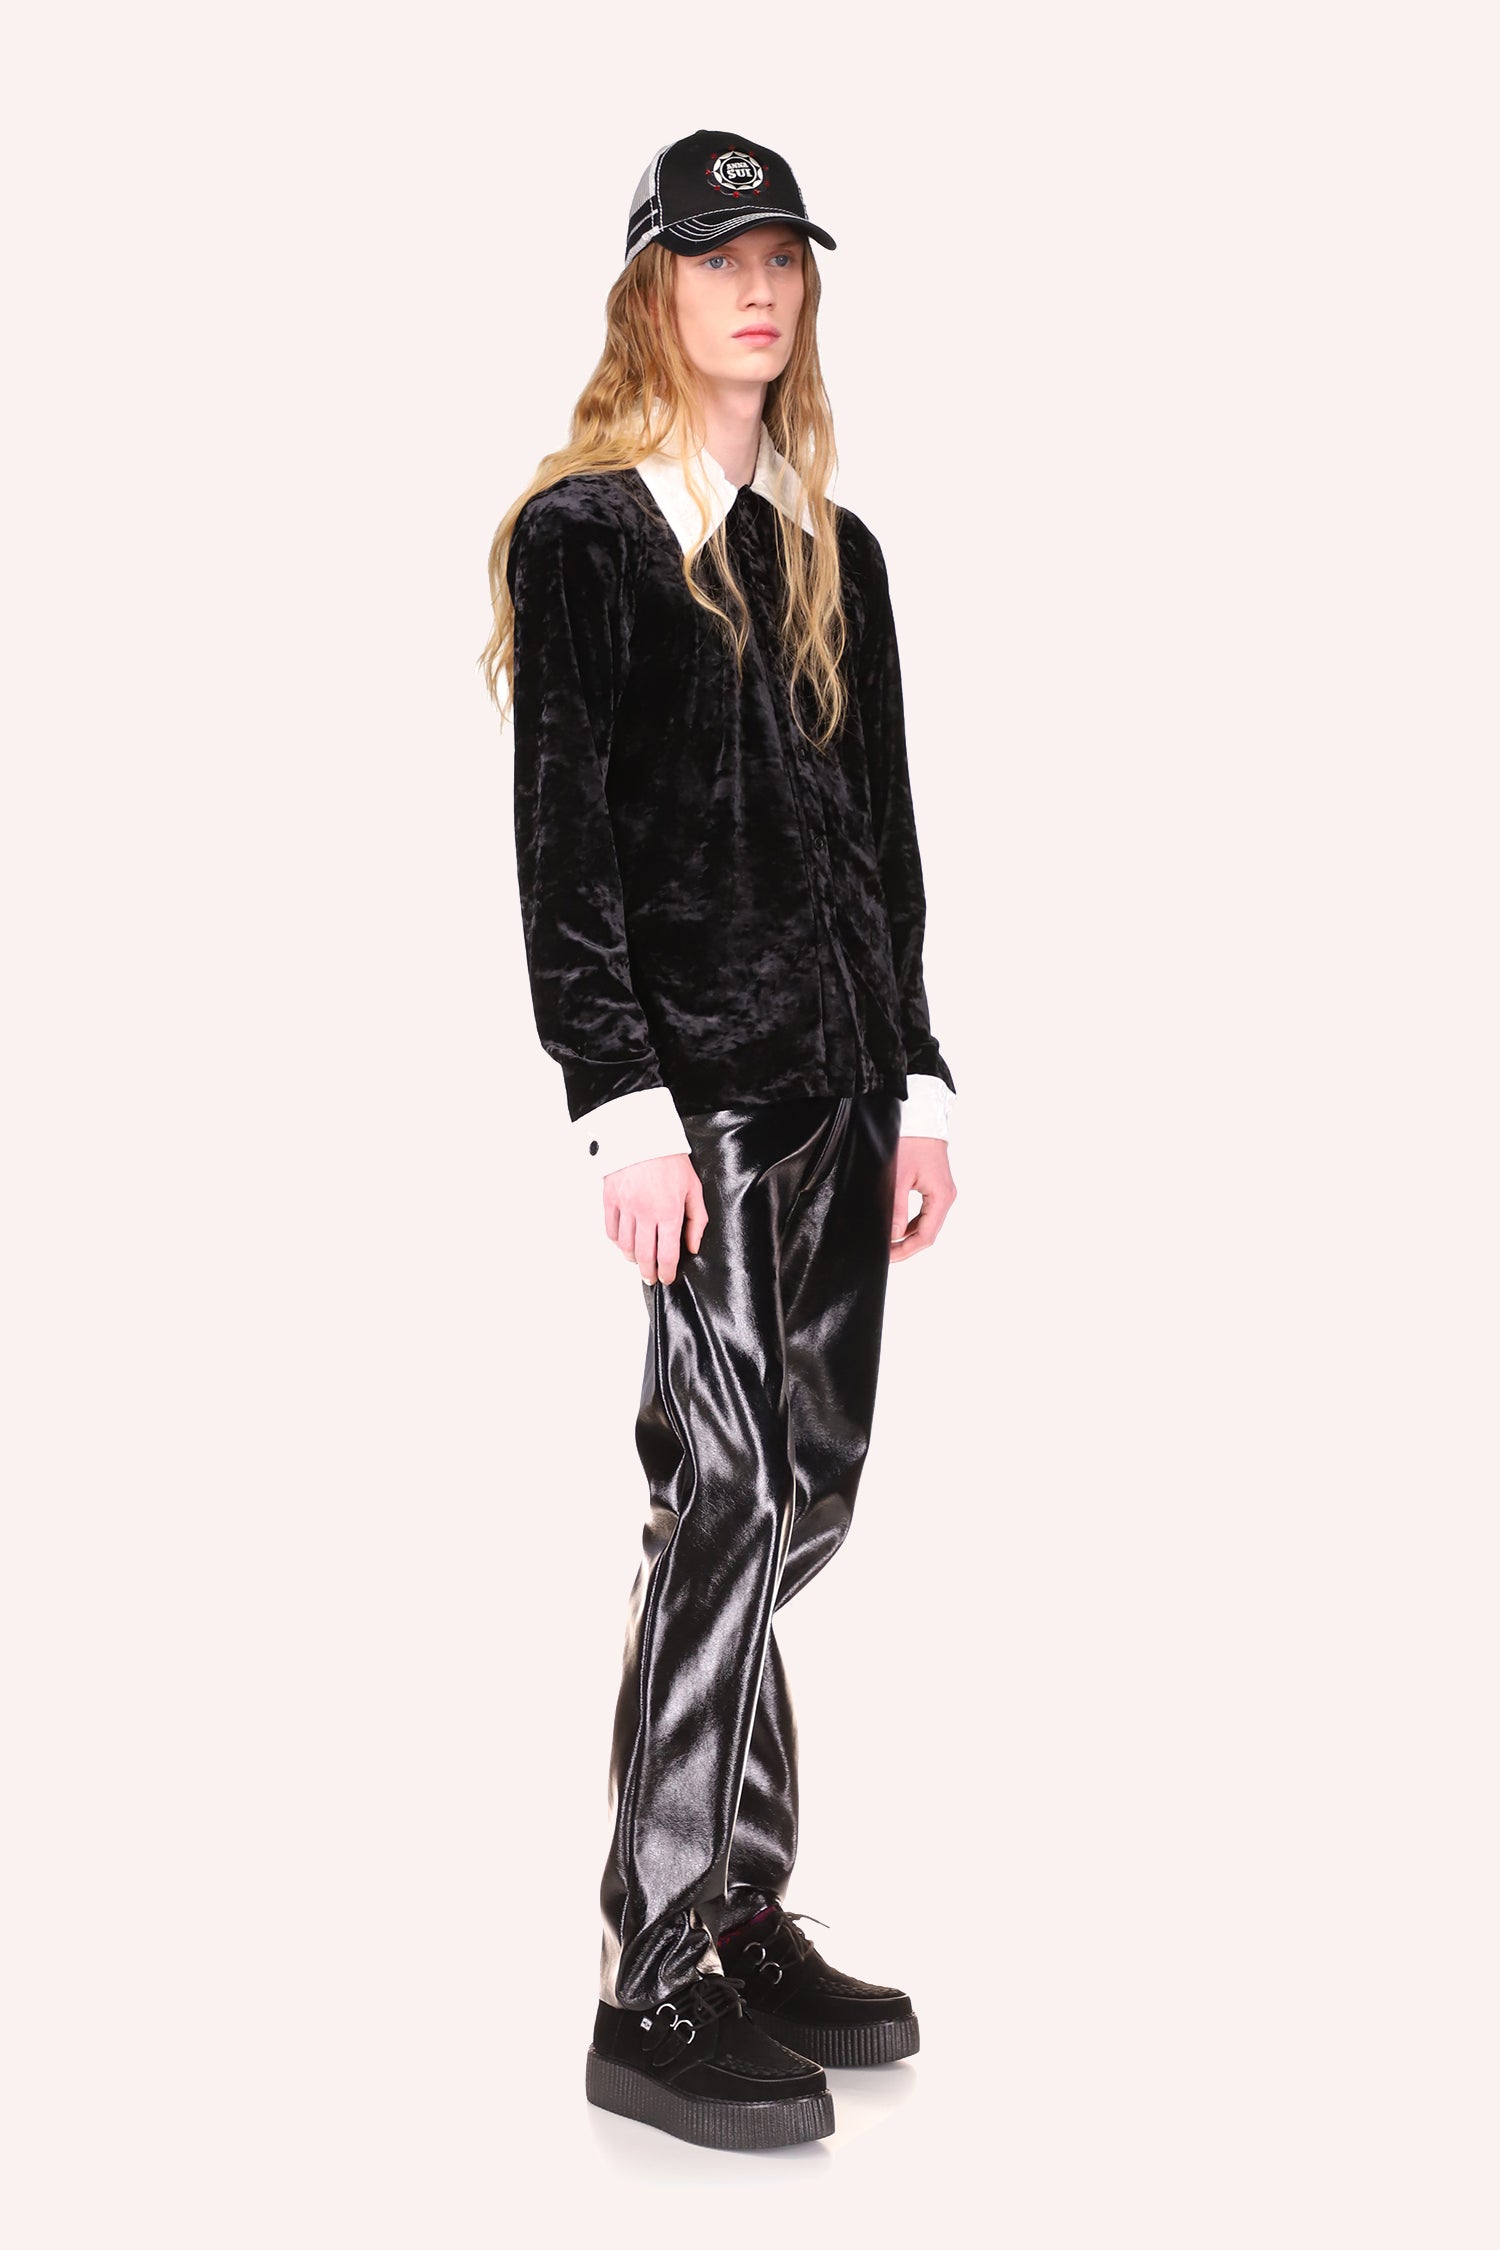 Stretch shiny Velvet, with 6-buttons Black, hips long, large white collar, and white handhold